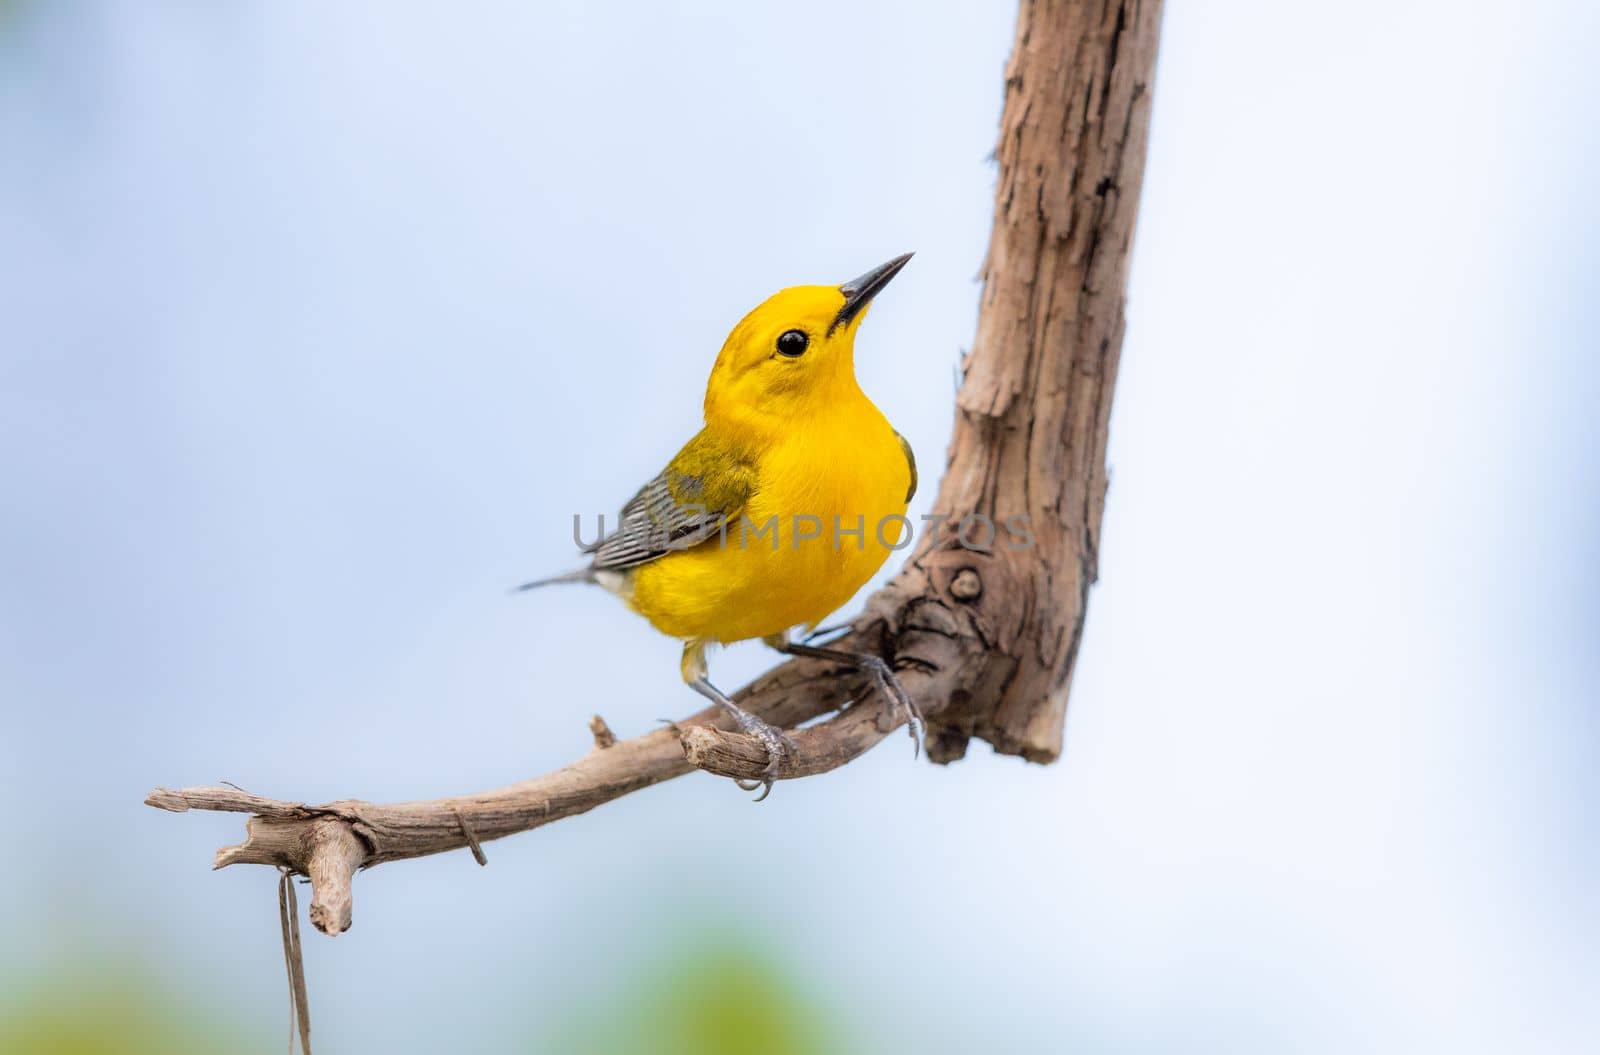 Prothonotary Warbler perched on a tree during migration season by Rajh_Photography